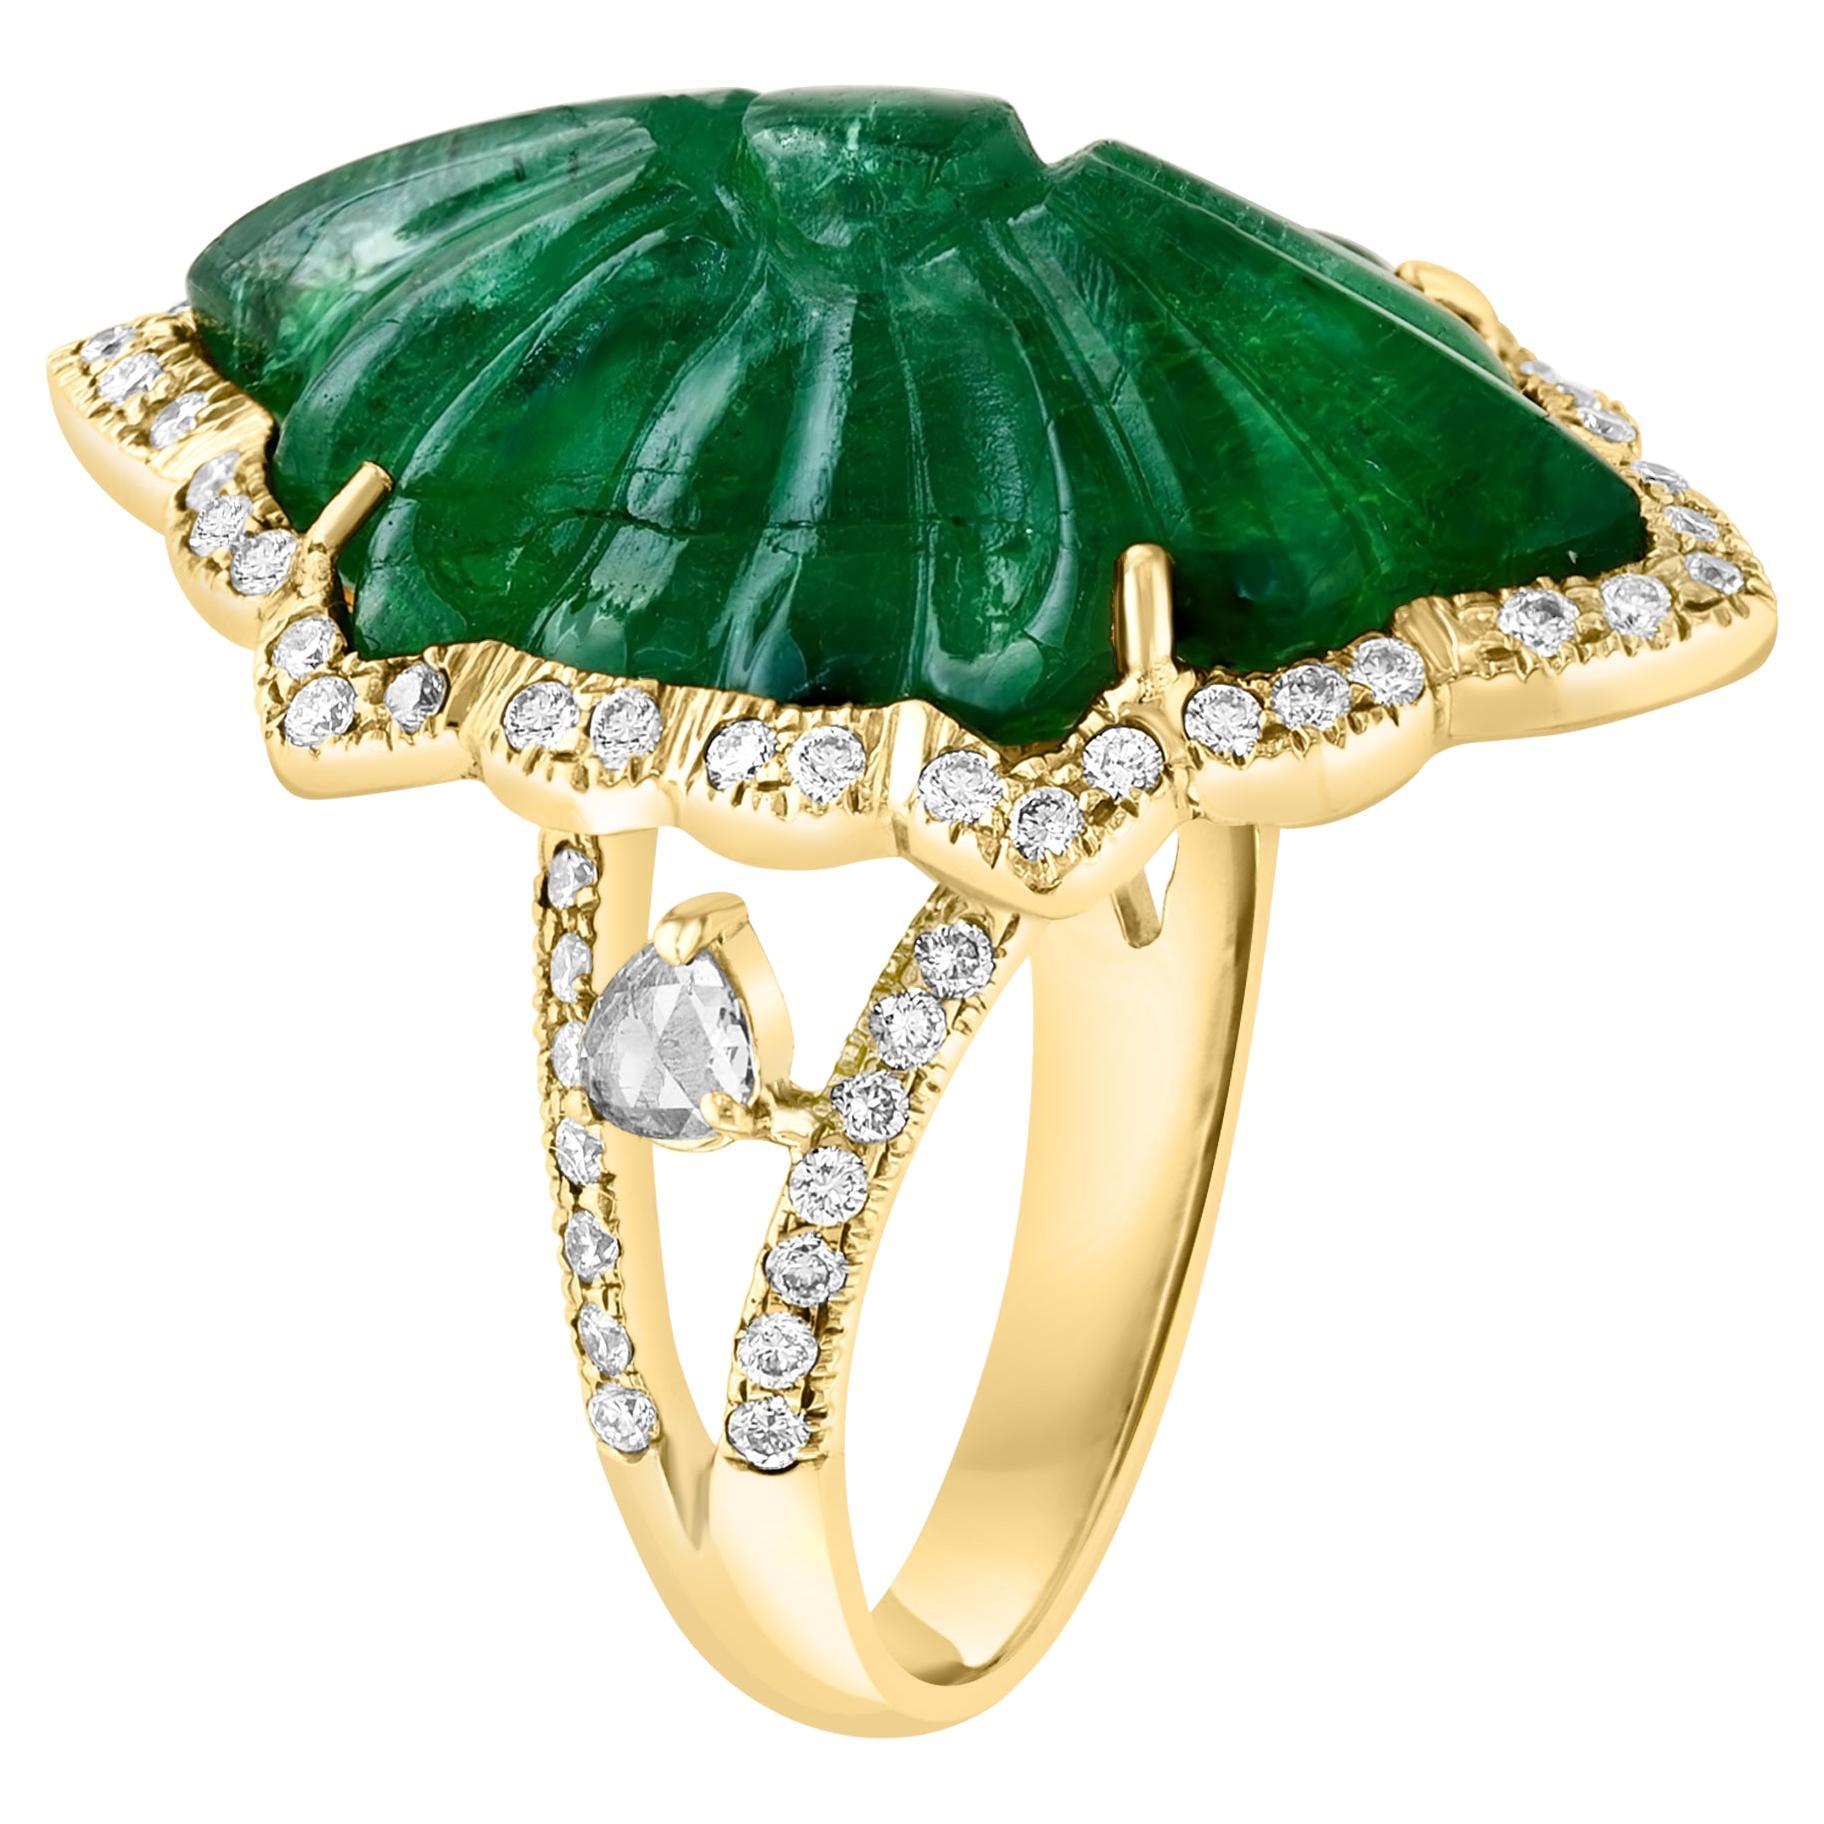 Vintage 12 Ct Natural Carved Emerald & 1.5 Ct Diamond Ring 18 Kt Yellow Gold For Sale